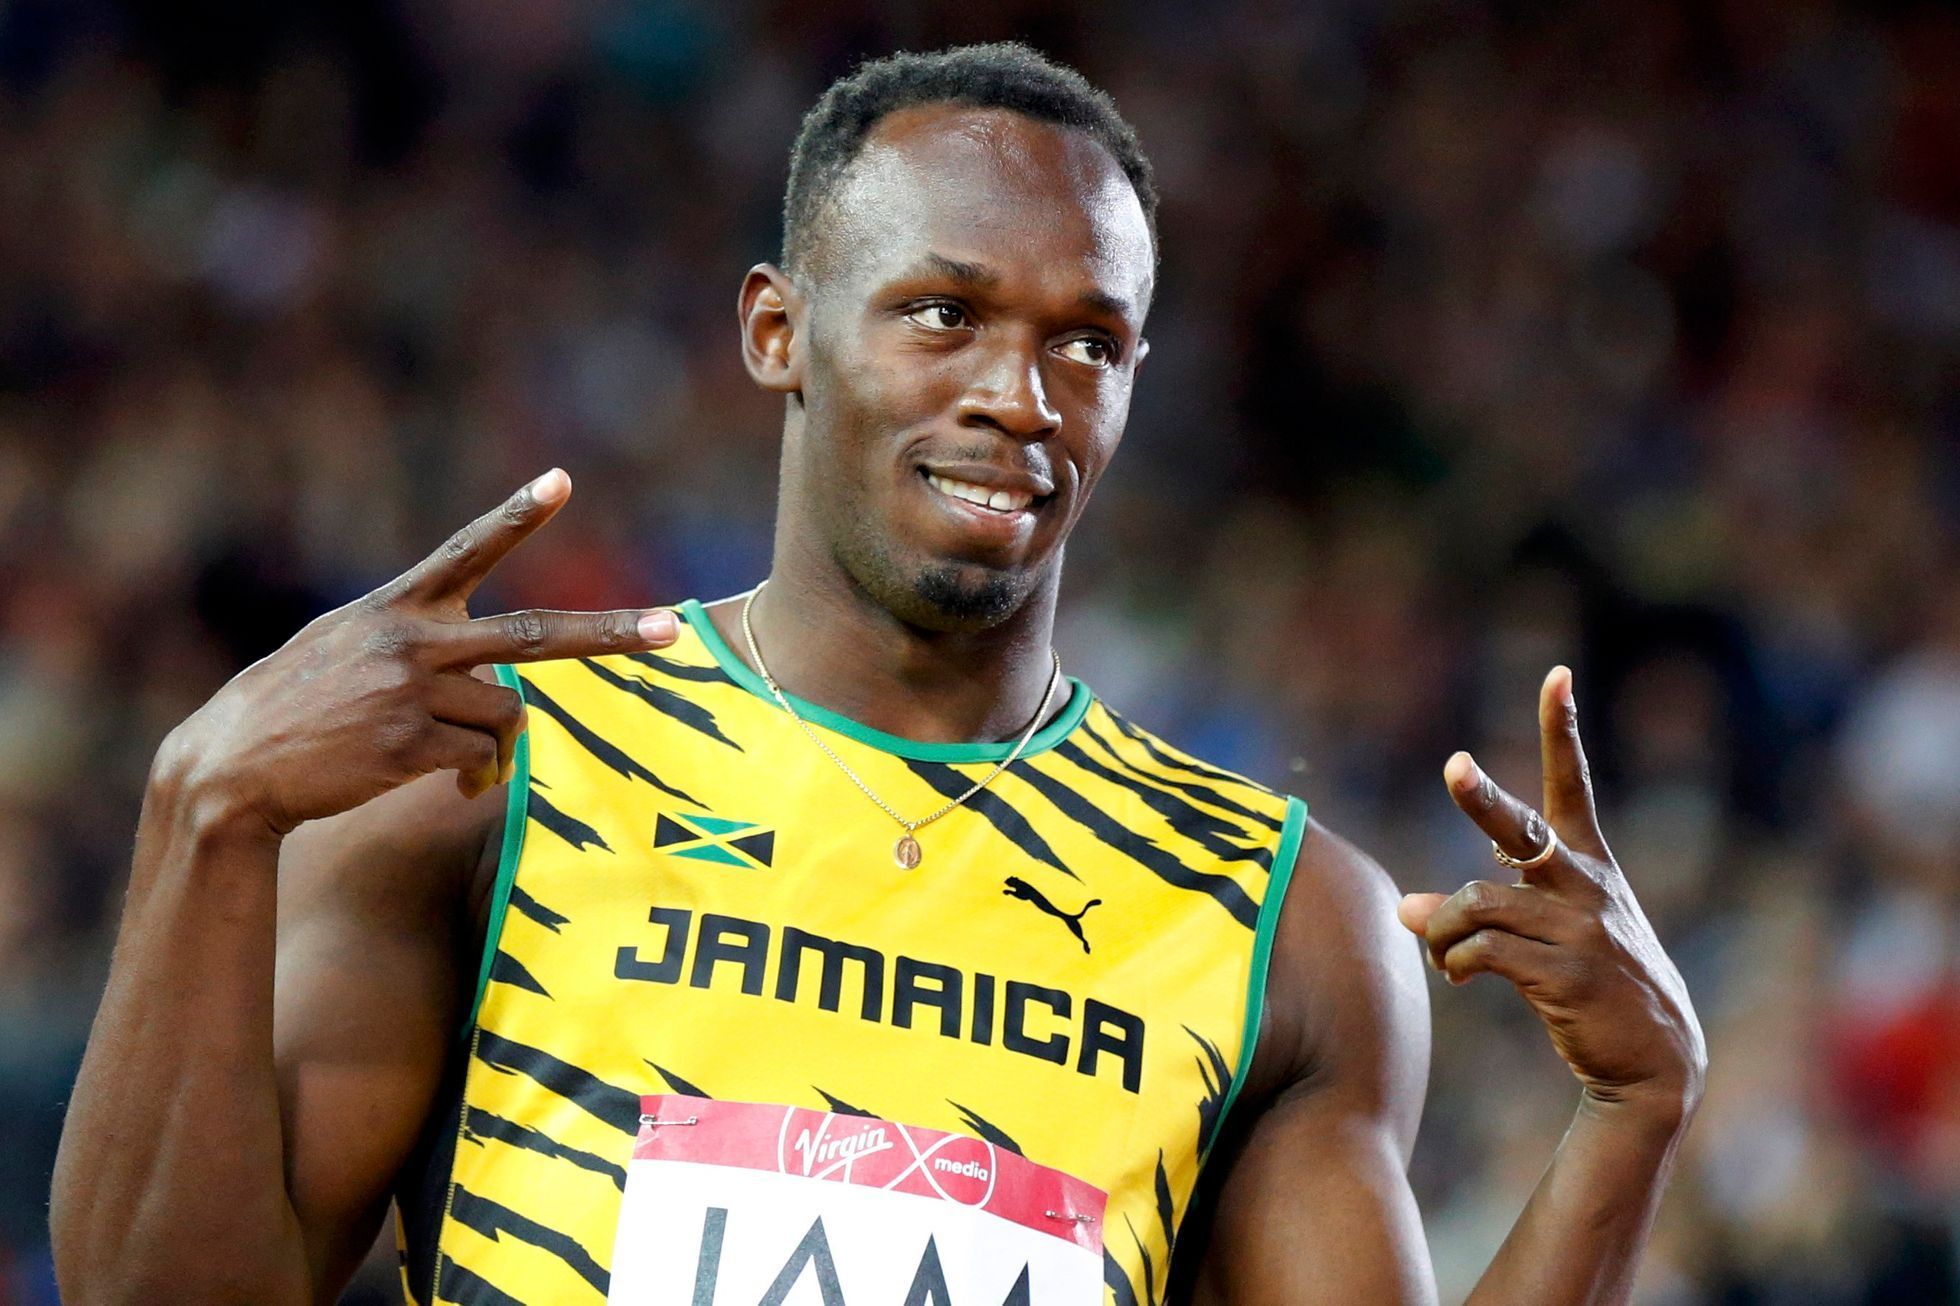 Bolt of Jamaica gestures before competing in a heat of the men's 4x100m relay at the 2014 Commonwealth Games in Glasgow